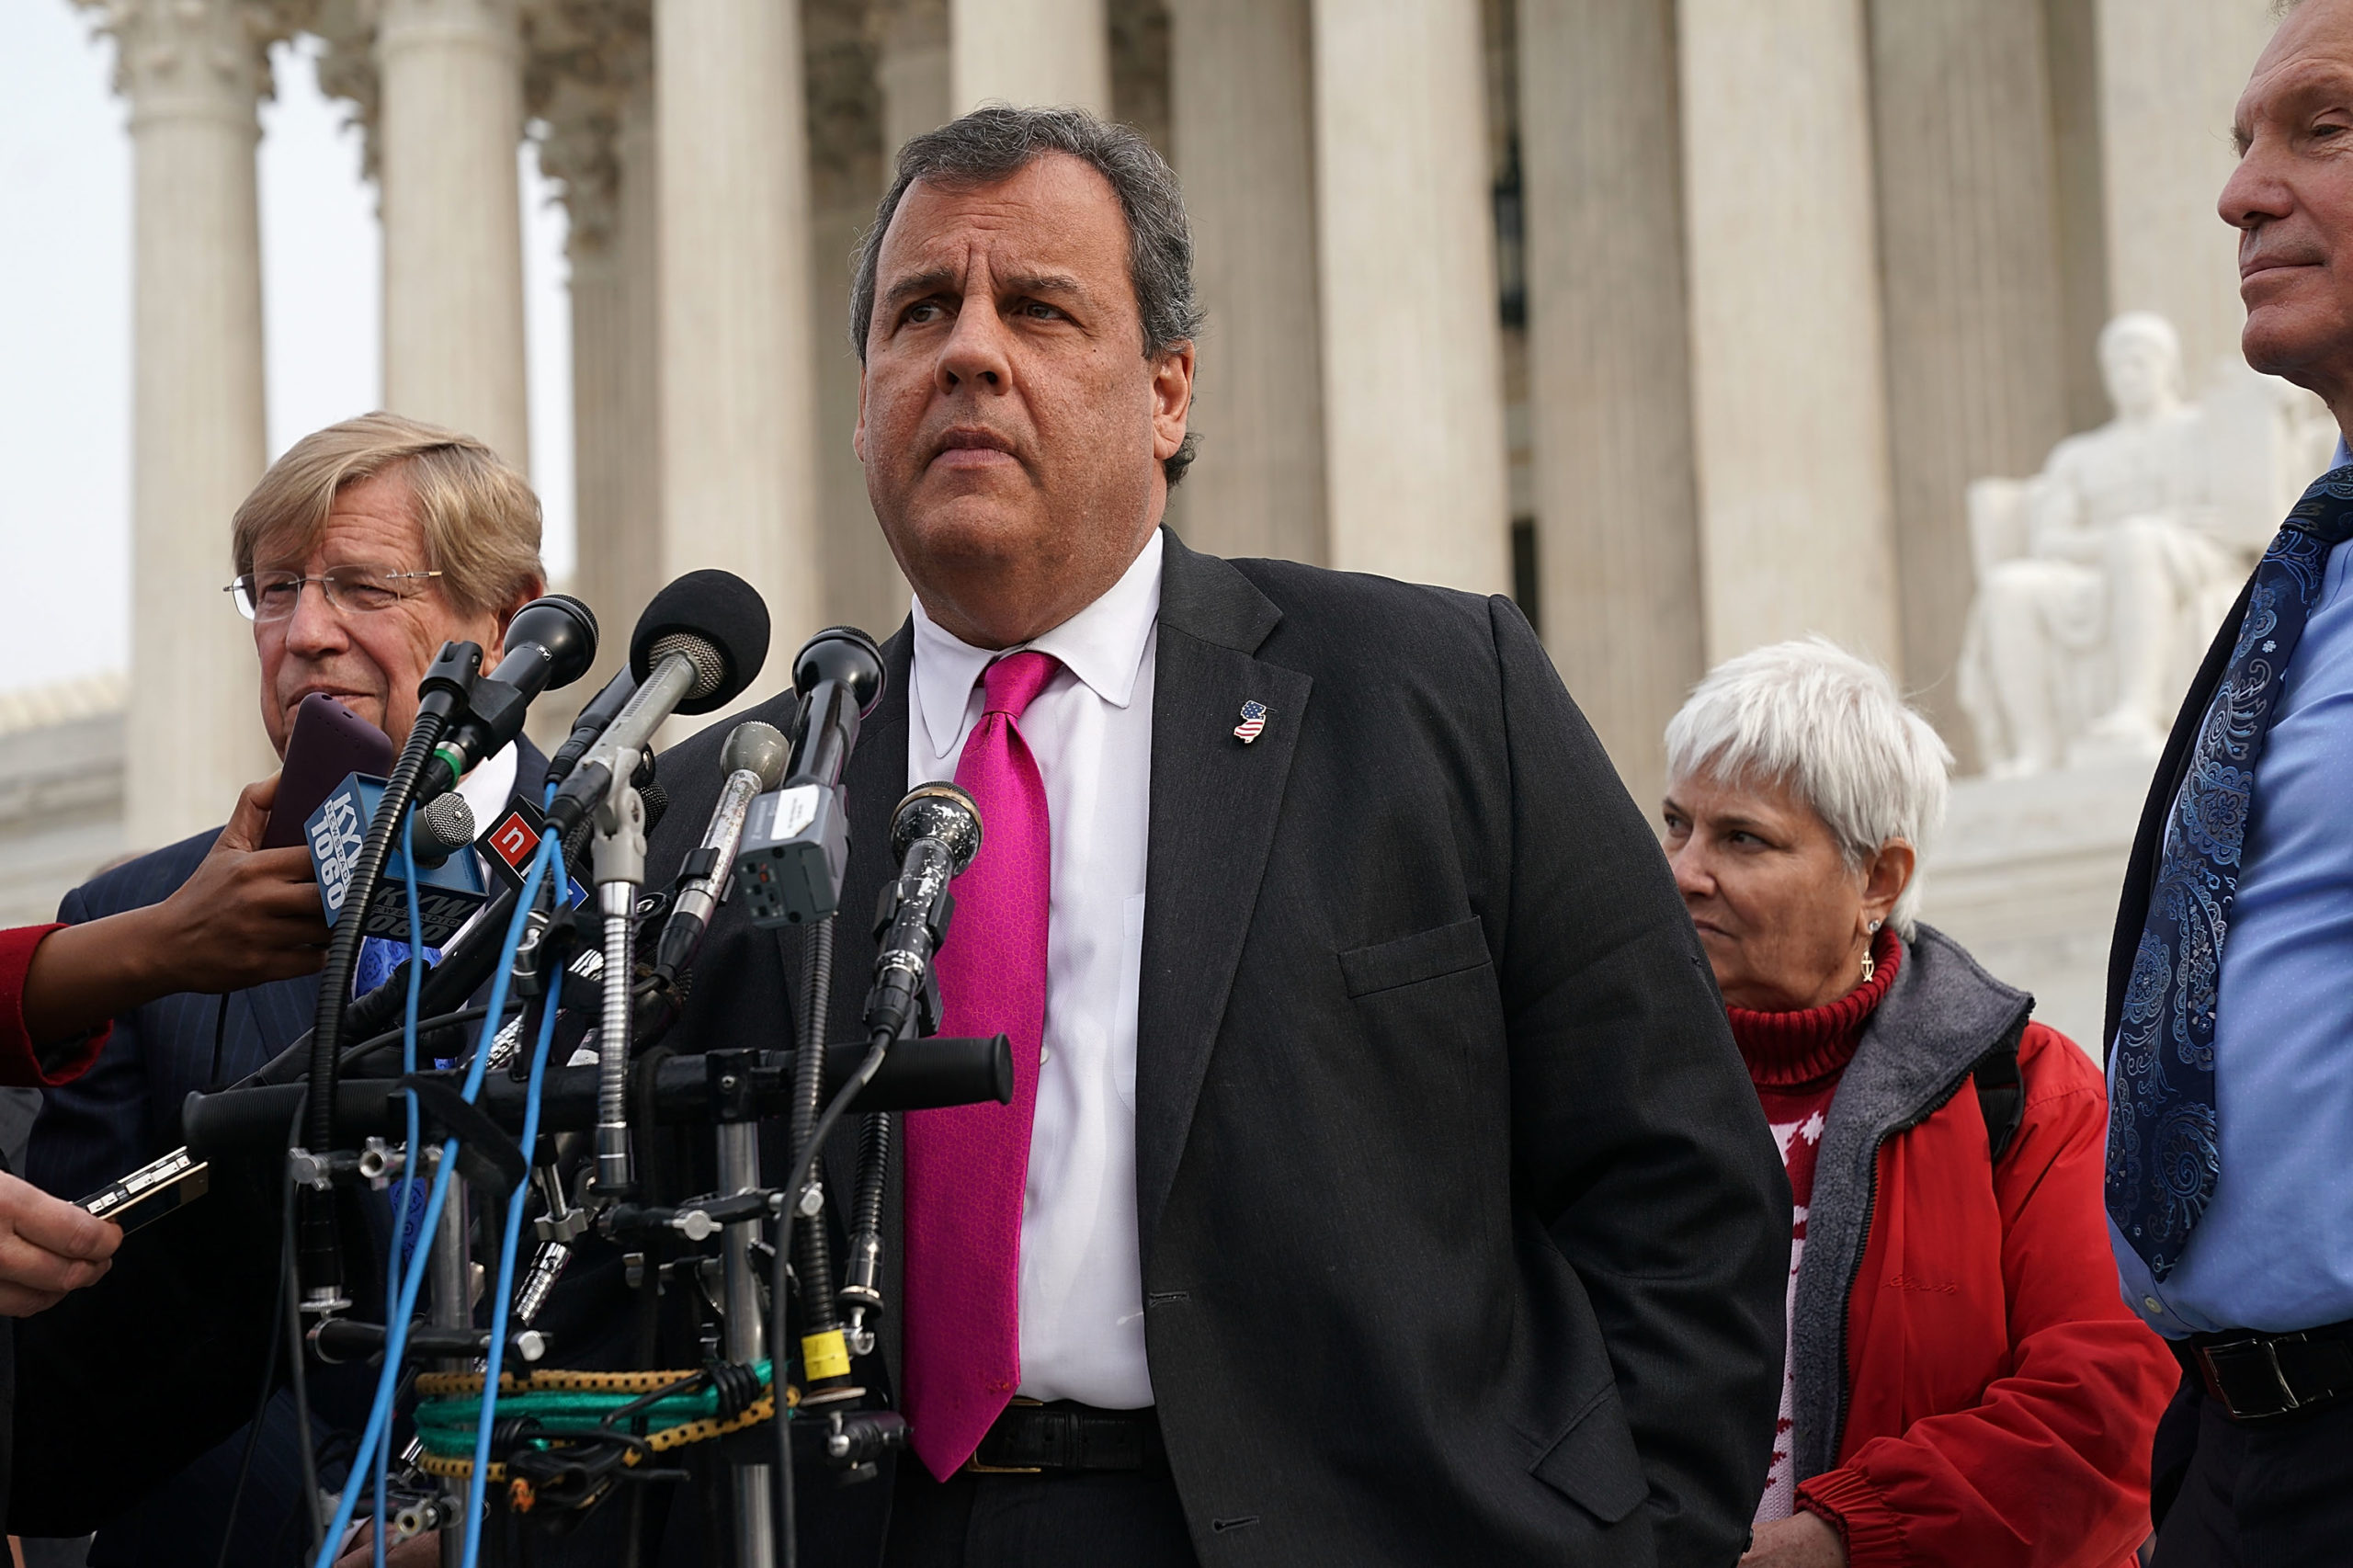 WASHINGTON, DC - DECEMBER 04: New Jersey Governor Chris Christie (2nd L) speaks to members of the media as attorney Ted Olson (L) looks on in front of the U.S. Supreme Court December 4, 2017 in Washington, DC. (Photo by Alex Wong/Getty Images)